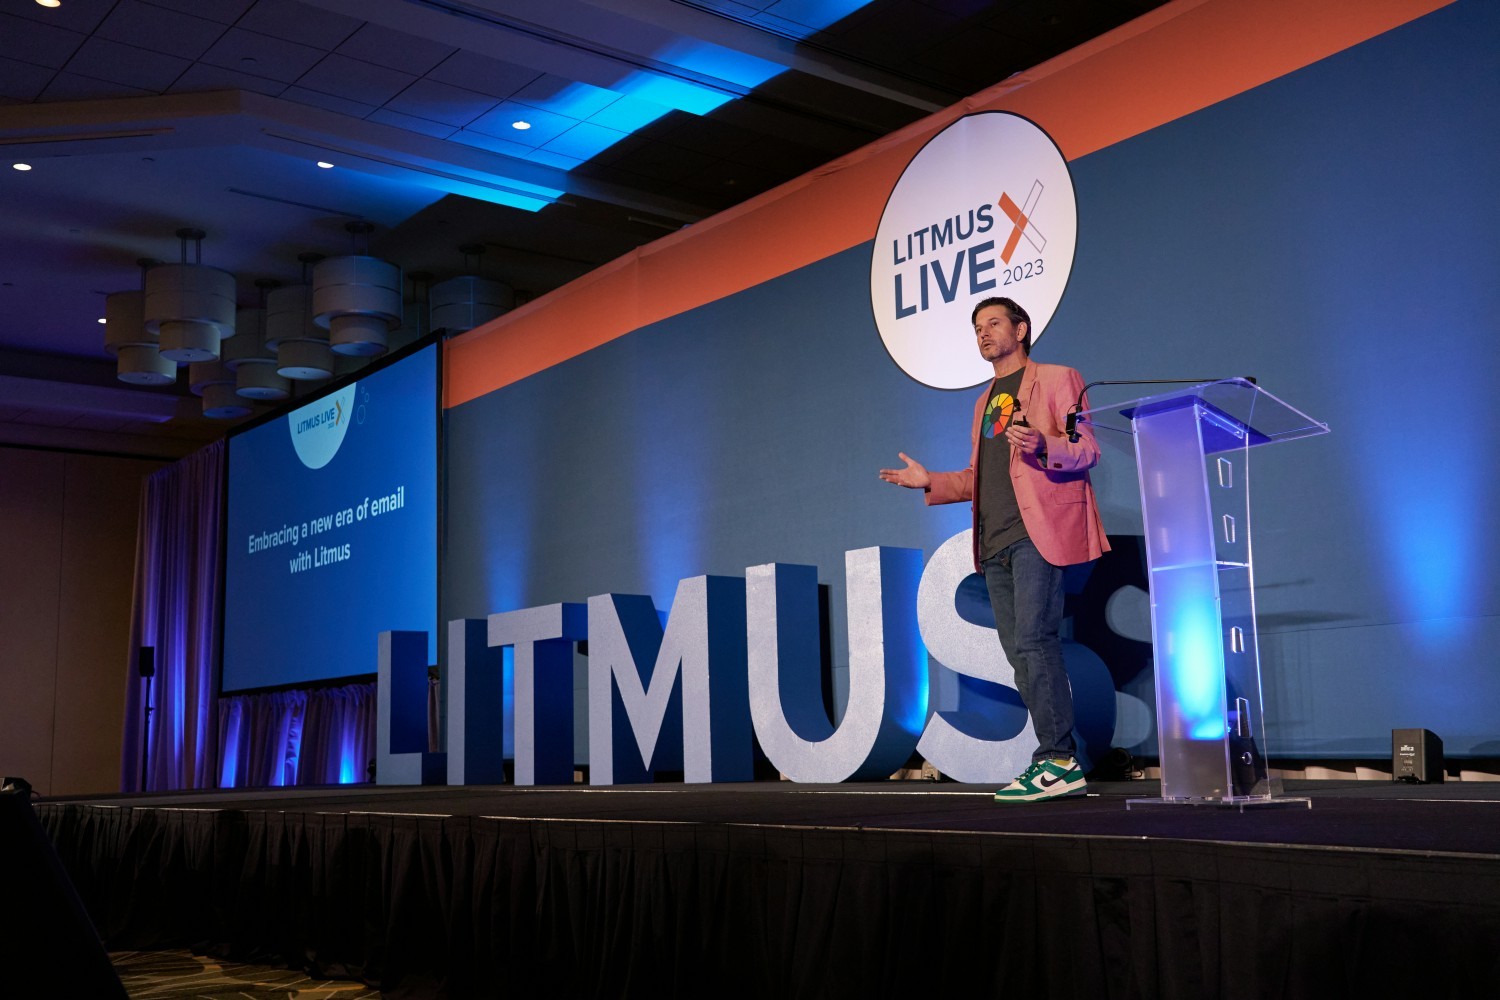 Litmus CEO Erik Nierenberg giving the welcome address at Litmus Live 2023 - the premier email event of the year